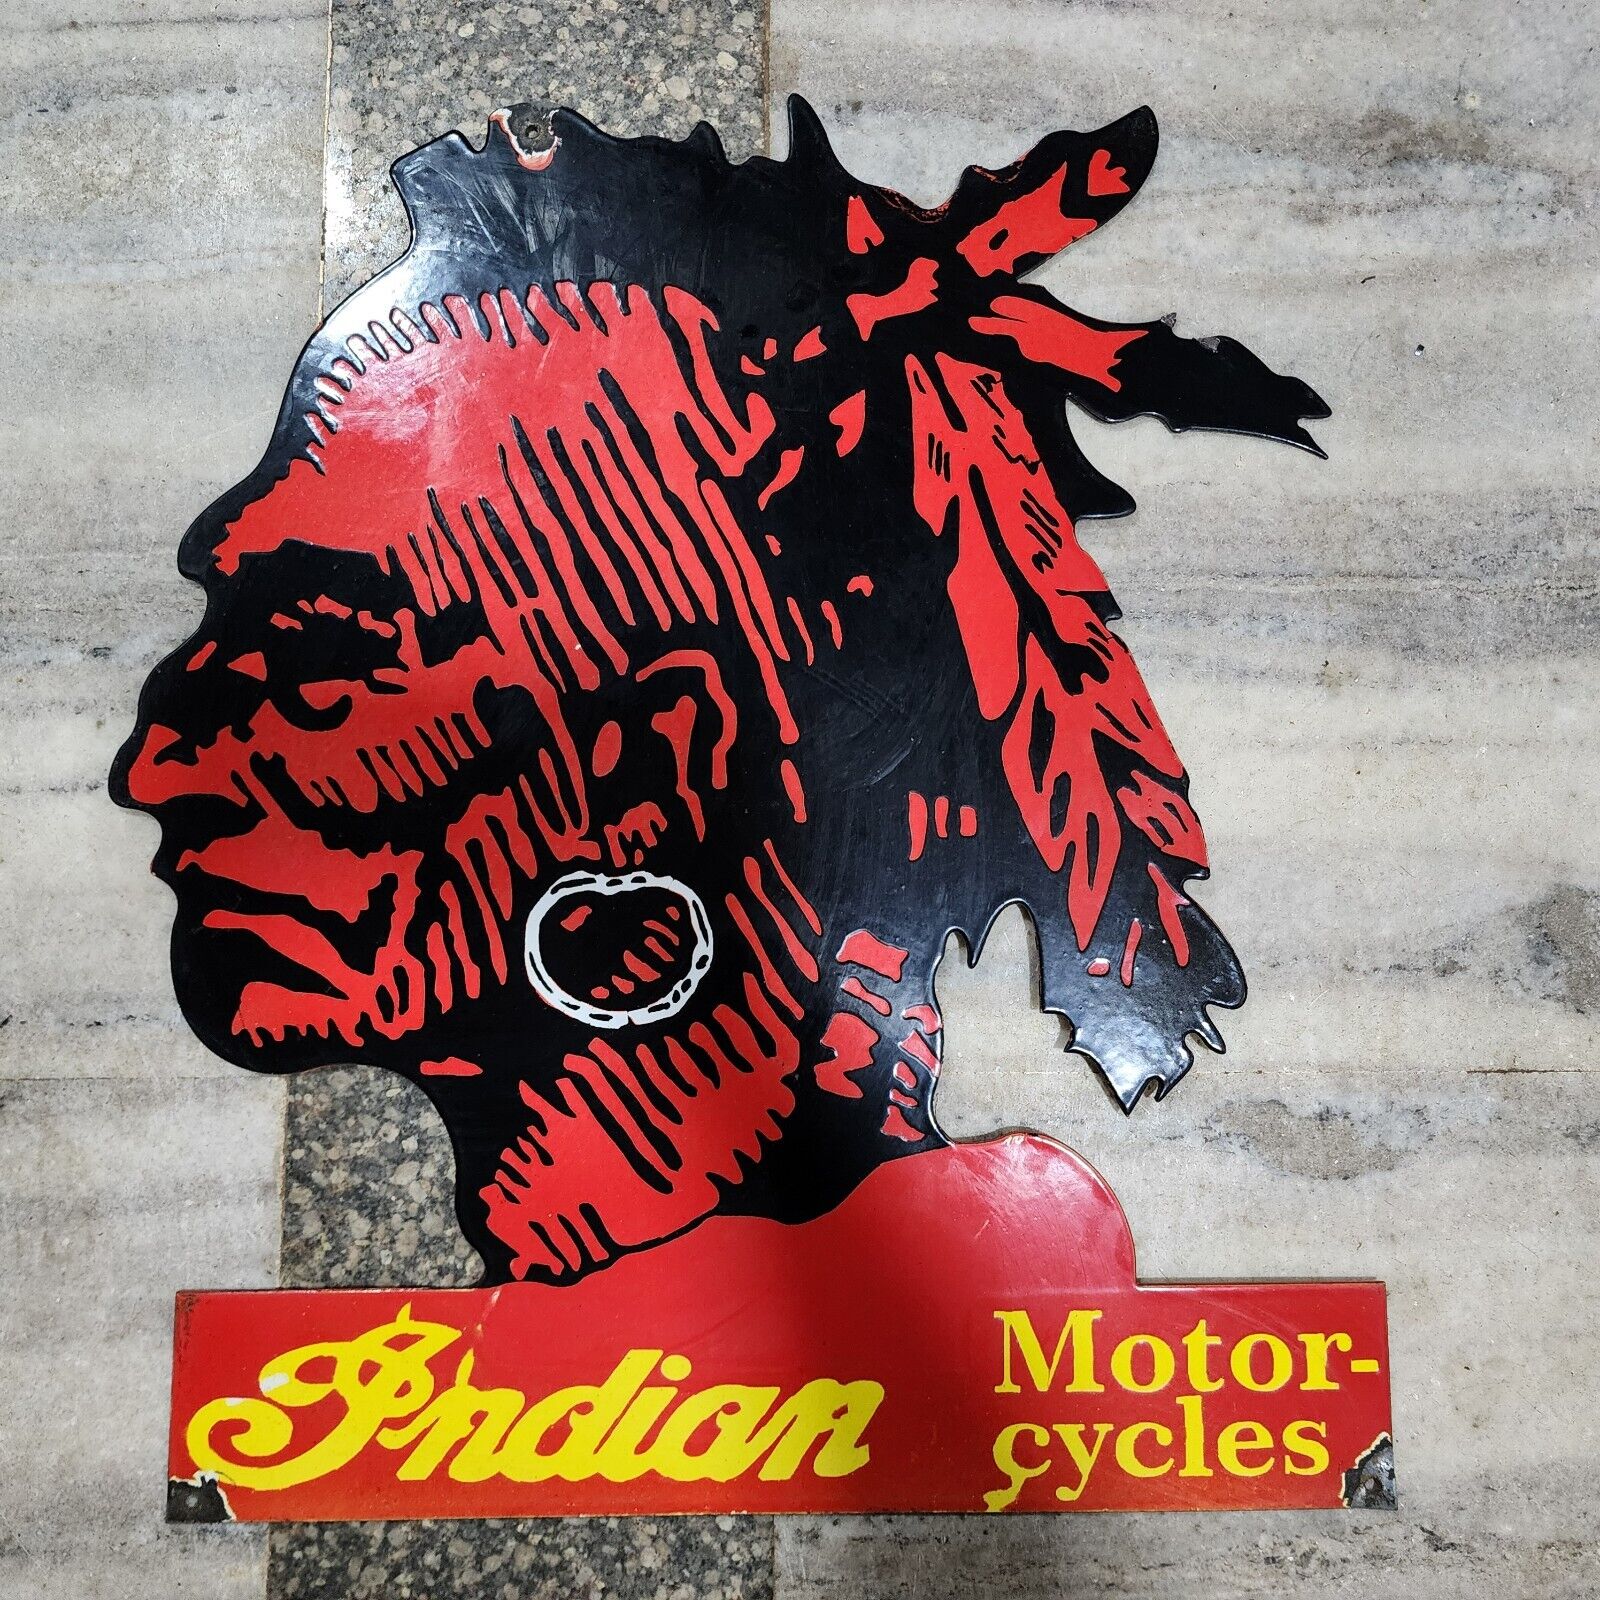 INDIAN MOTOR CYCLES PORCELAIN ENAMEL SIGN 21 X 23 INCHES